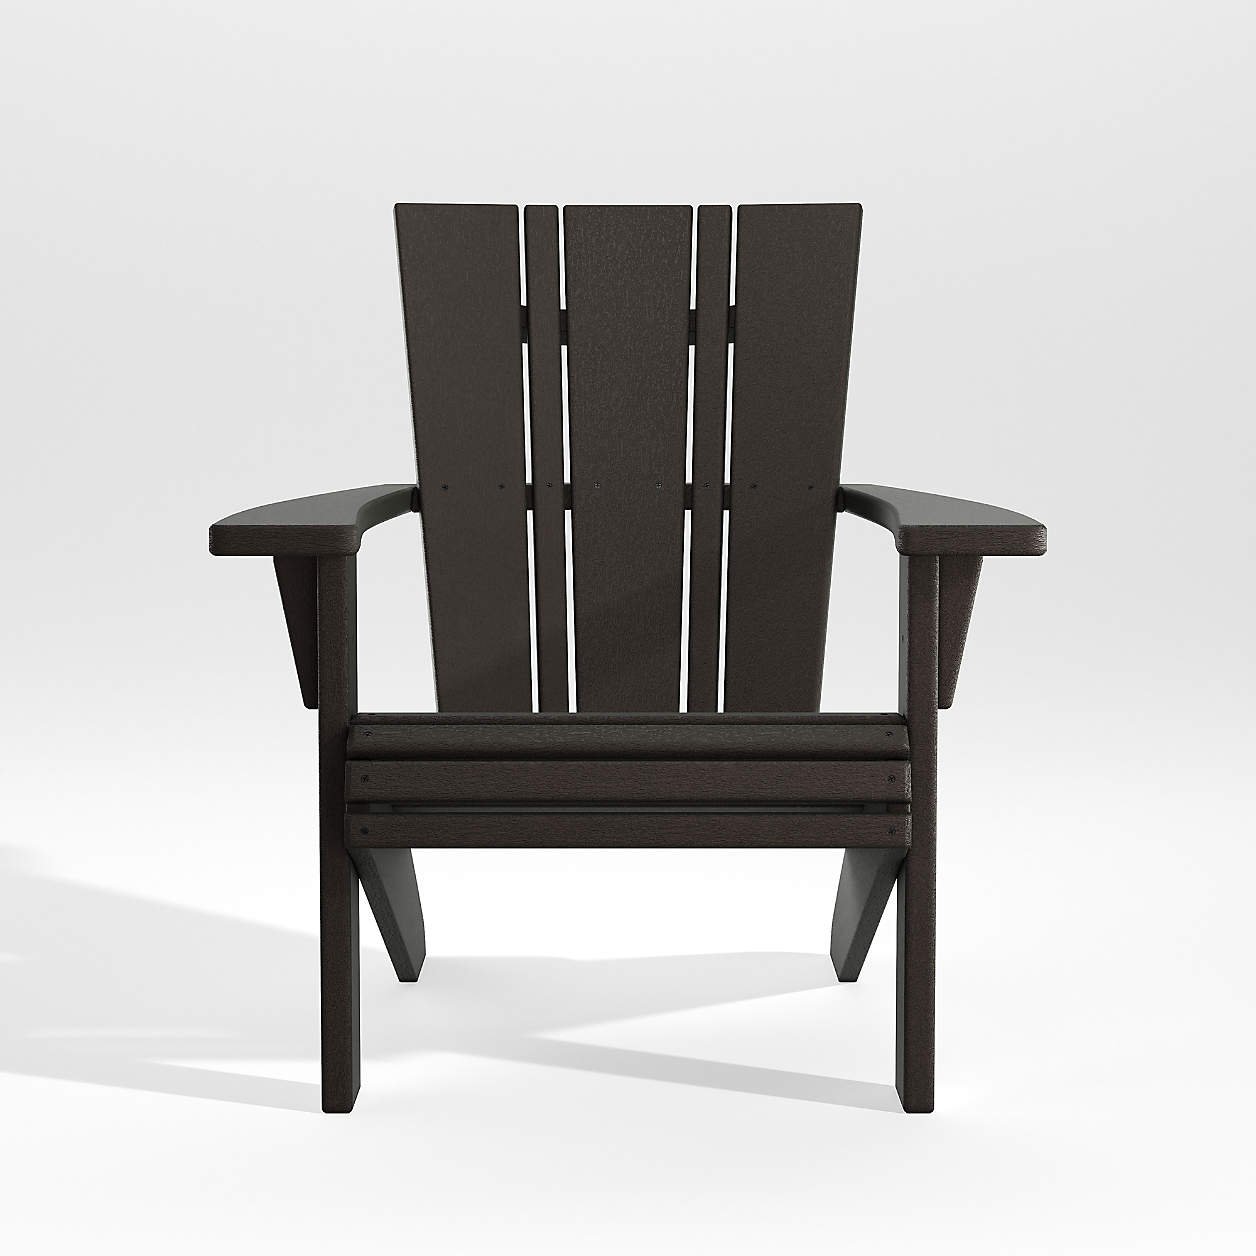 Black adirondack chair with straight back and curved armrests